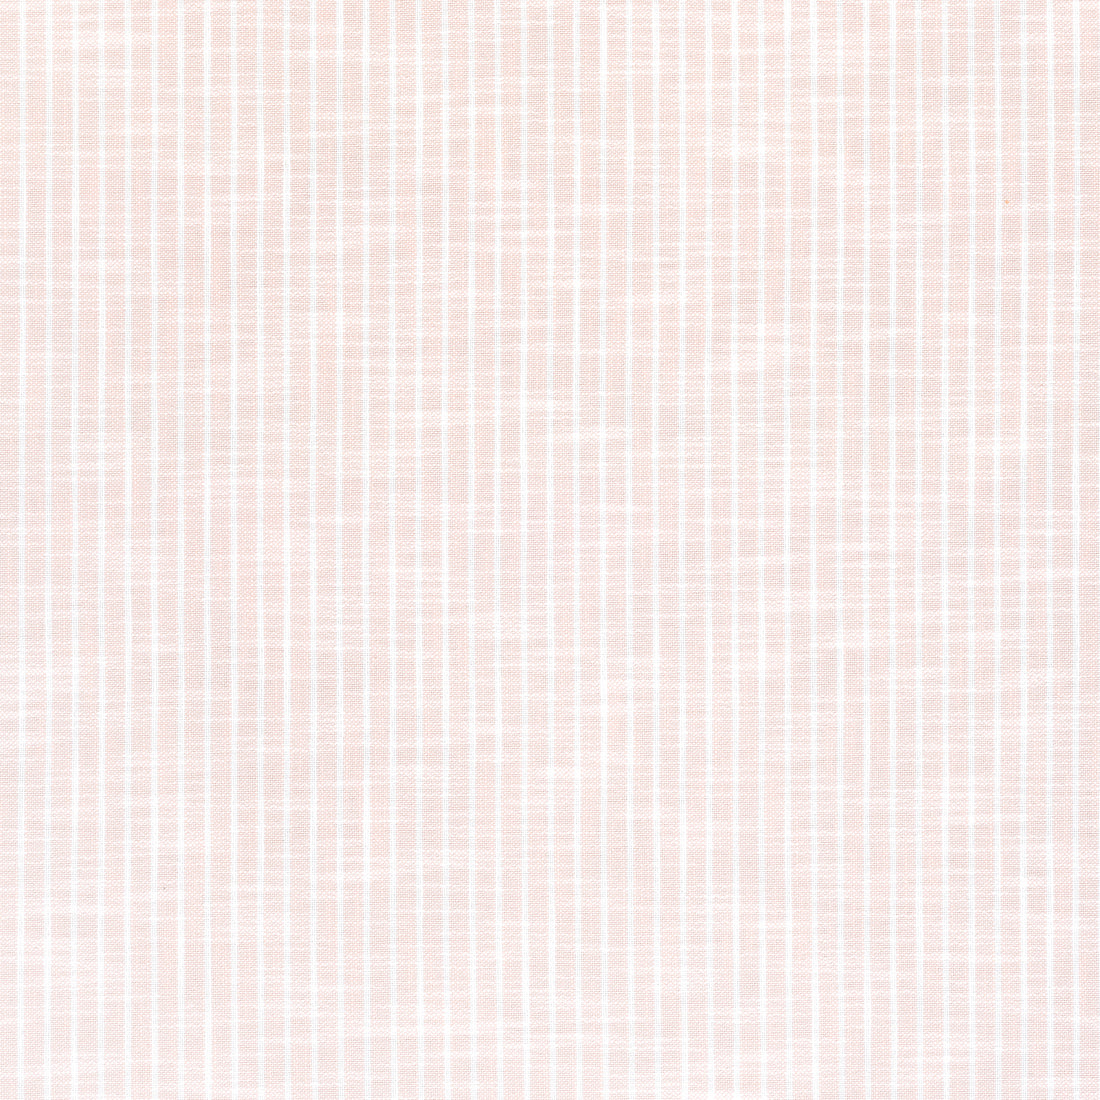 Bayside Stripe fabric in blush color - pattern number W73469 - by Thibaut in the Landmark collection